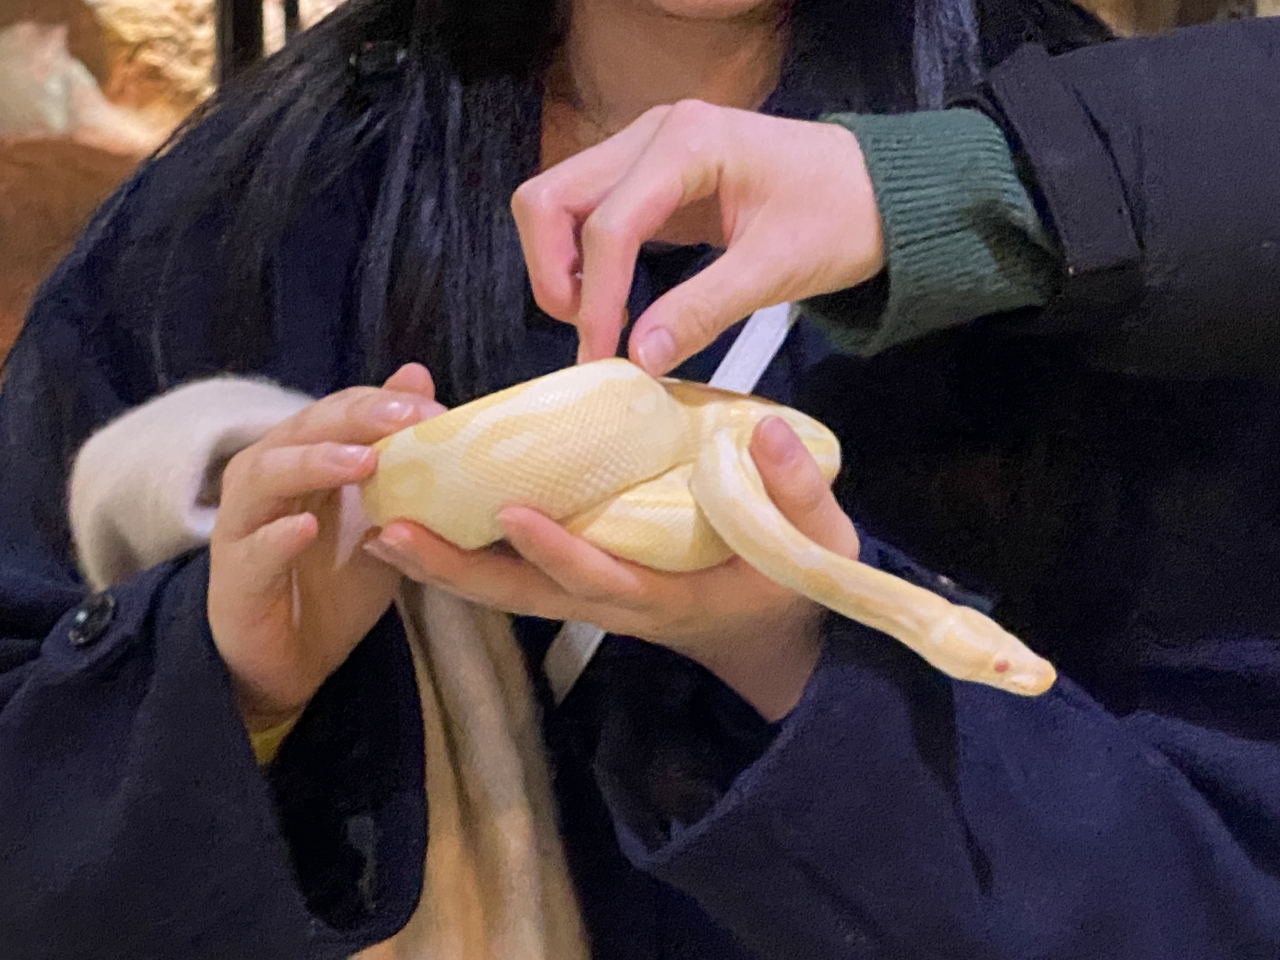 A visitor holds a white ball python. (Hwang Joo-young/The Korea Herald)